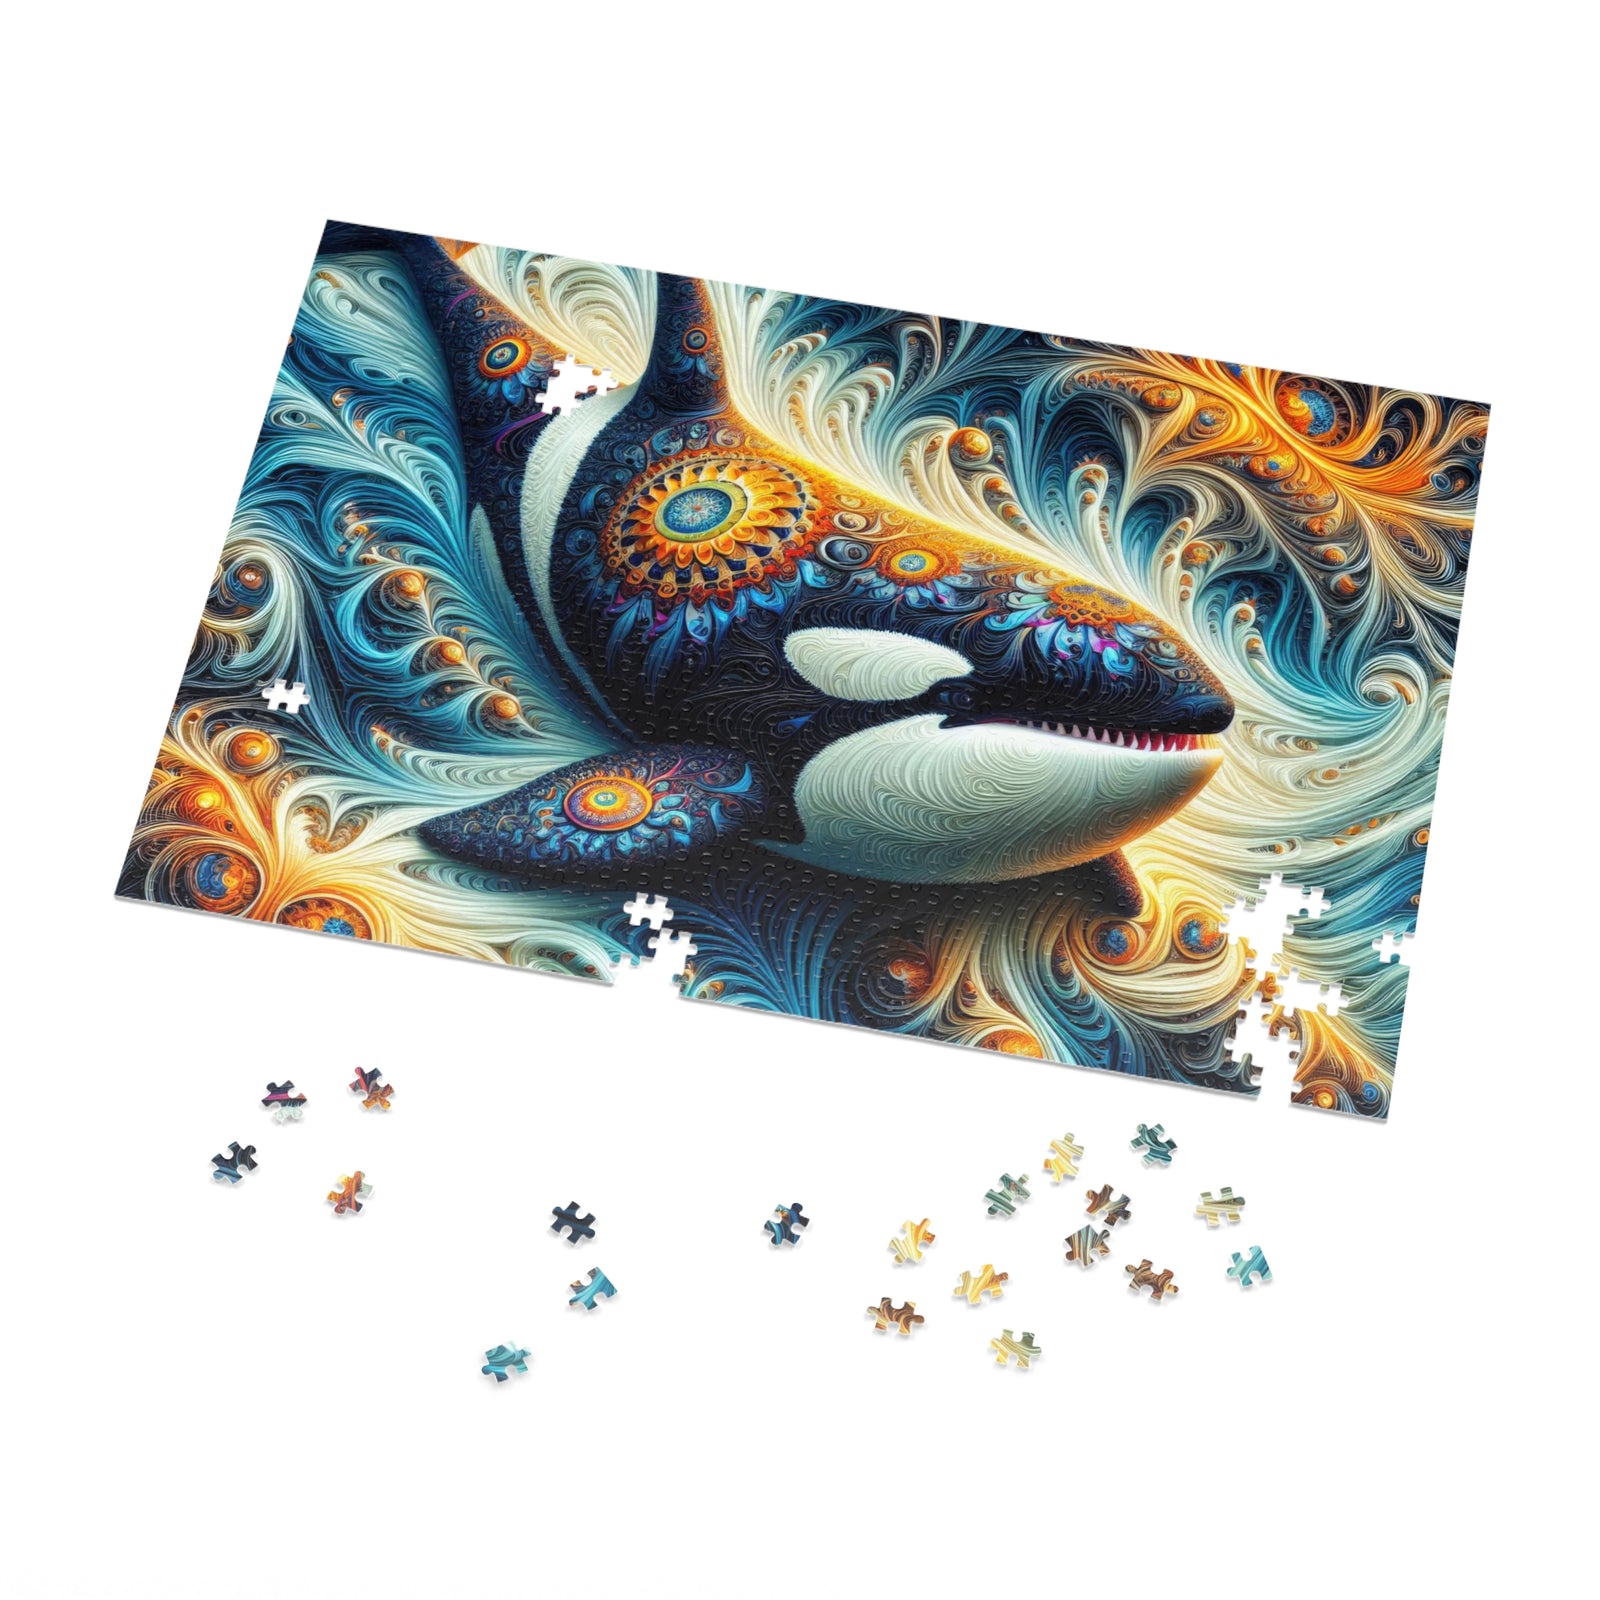 The Mandala Orca of the Abyssal Whorls Jigsaw Puzzle